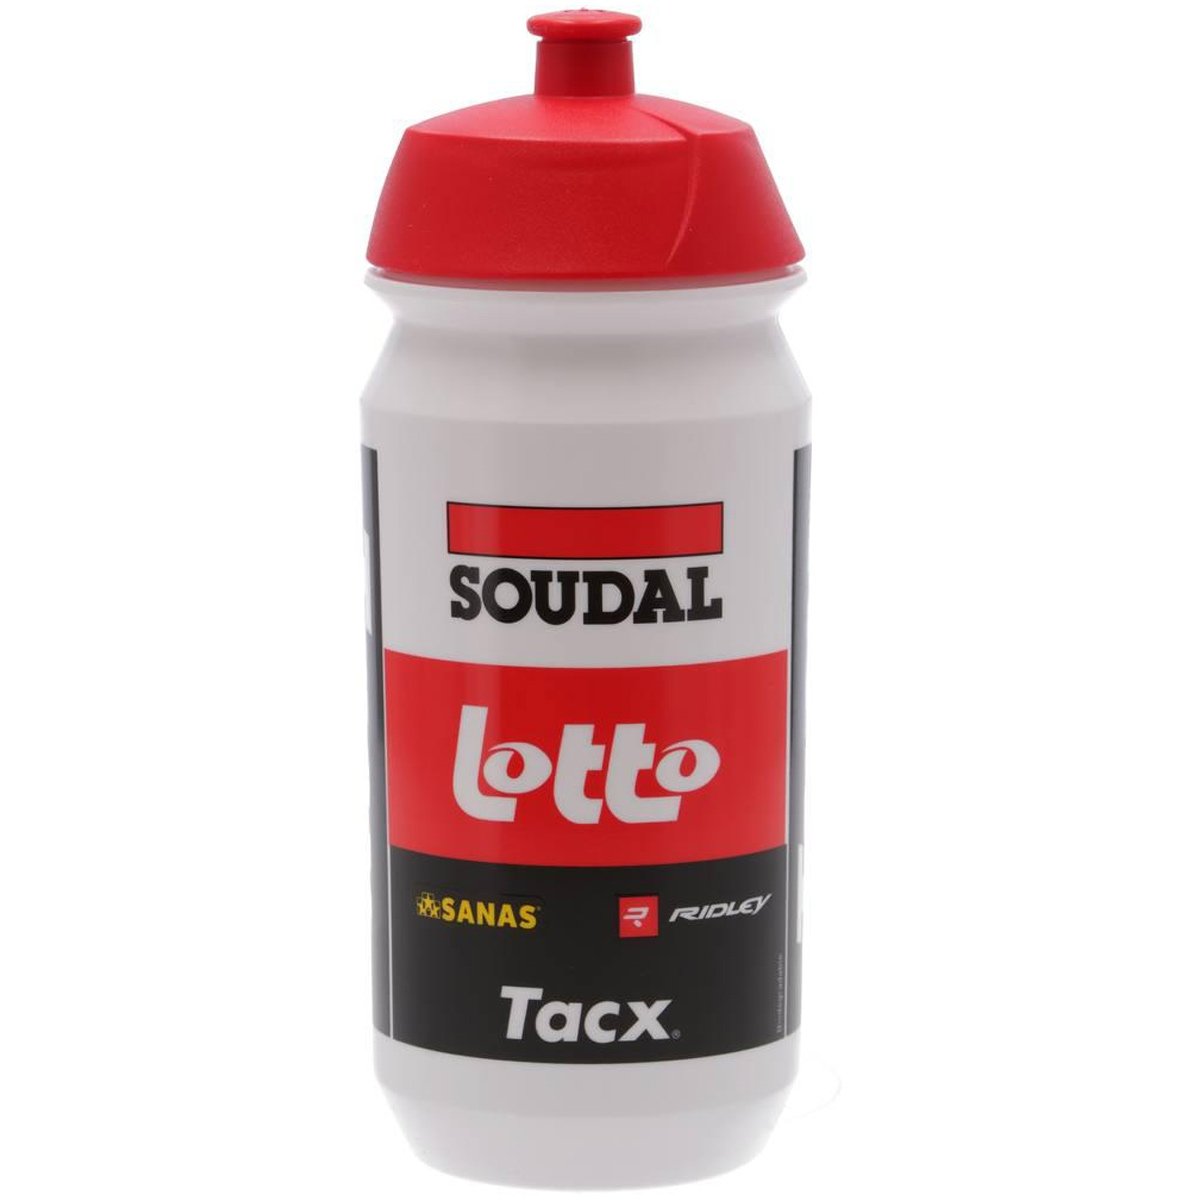 Tacx Water Bottle (Lotto Soudal)